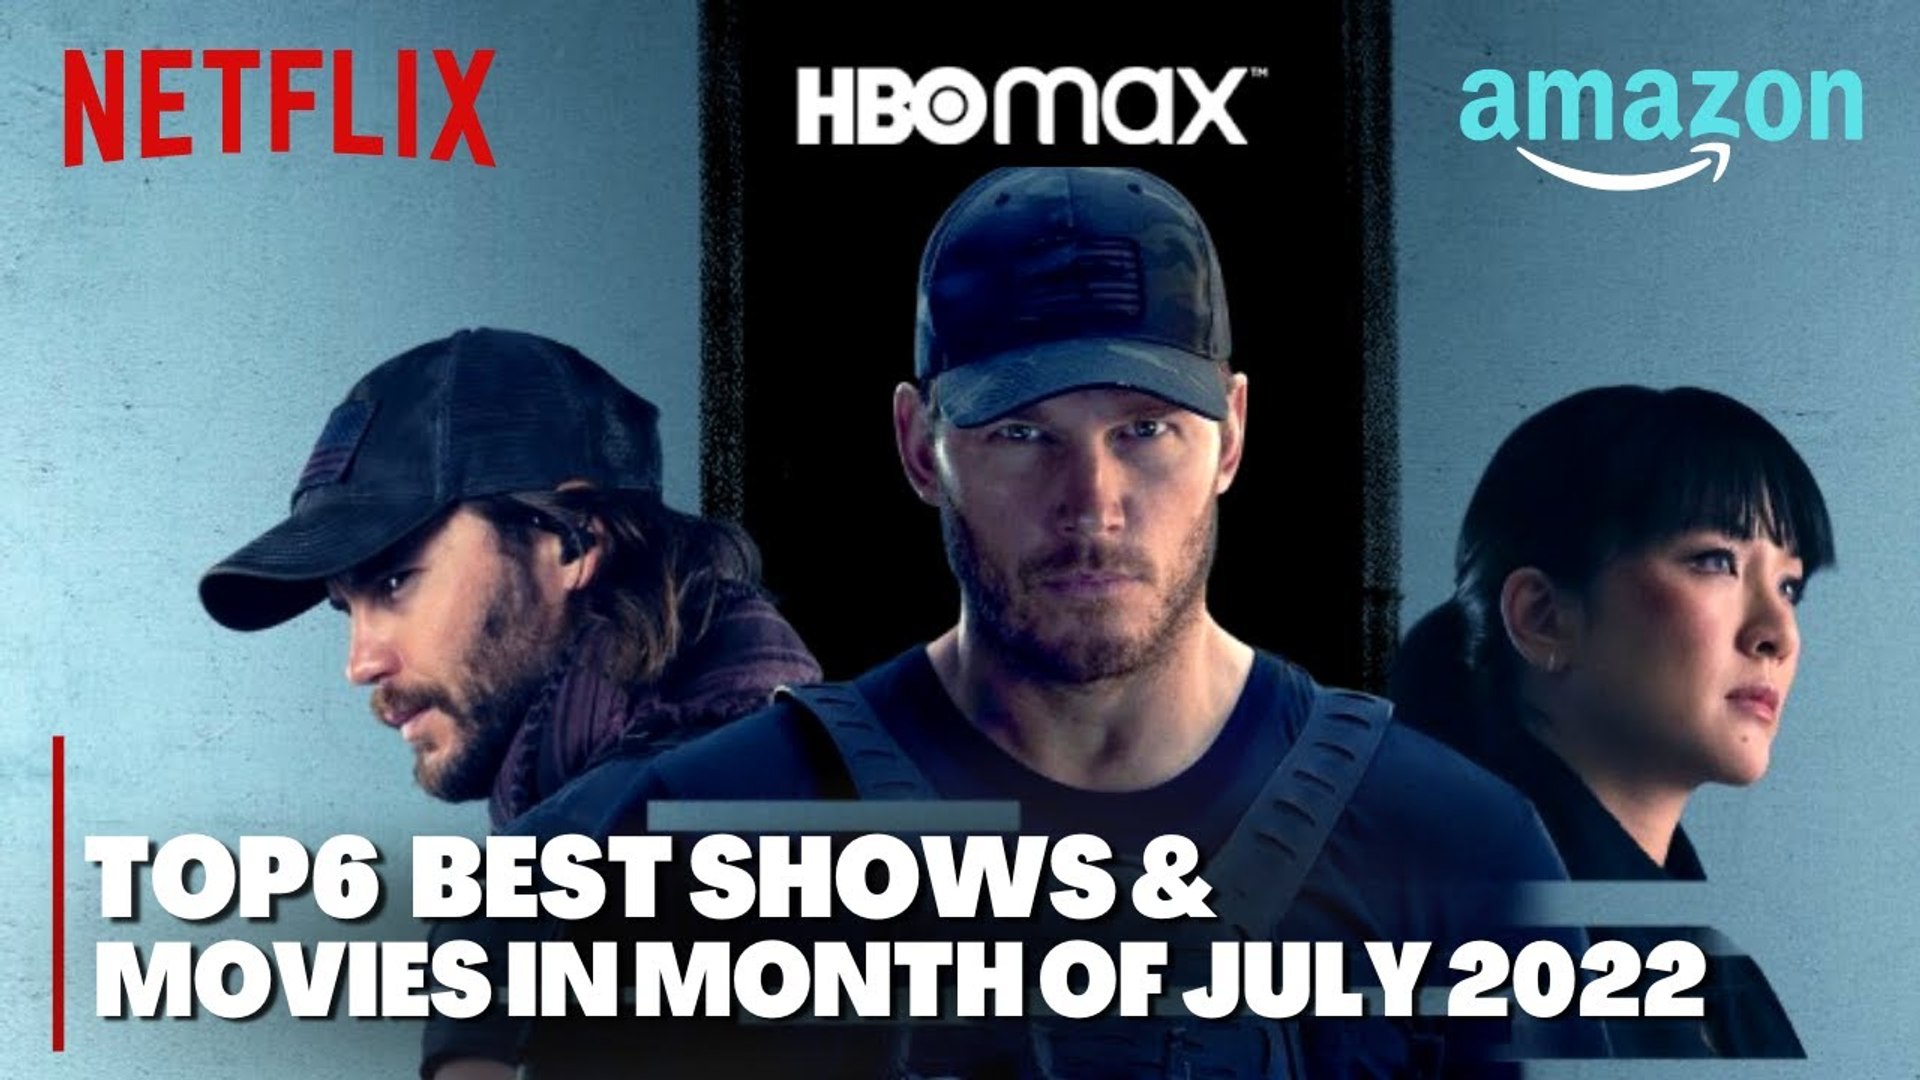 What to watch on HBO Max: New shows and movies in July 2022